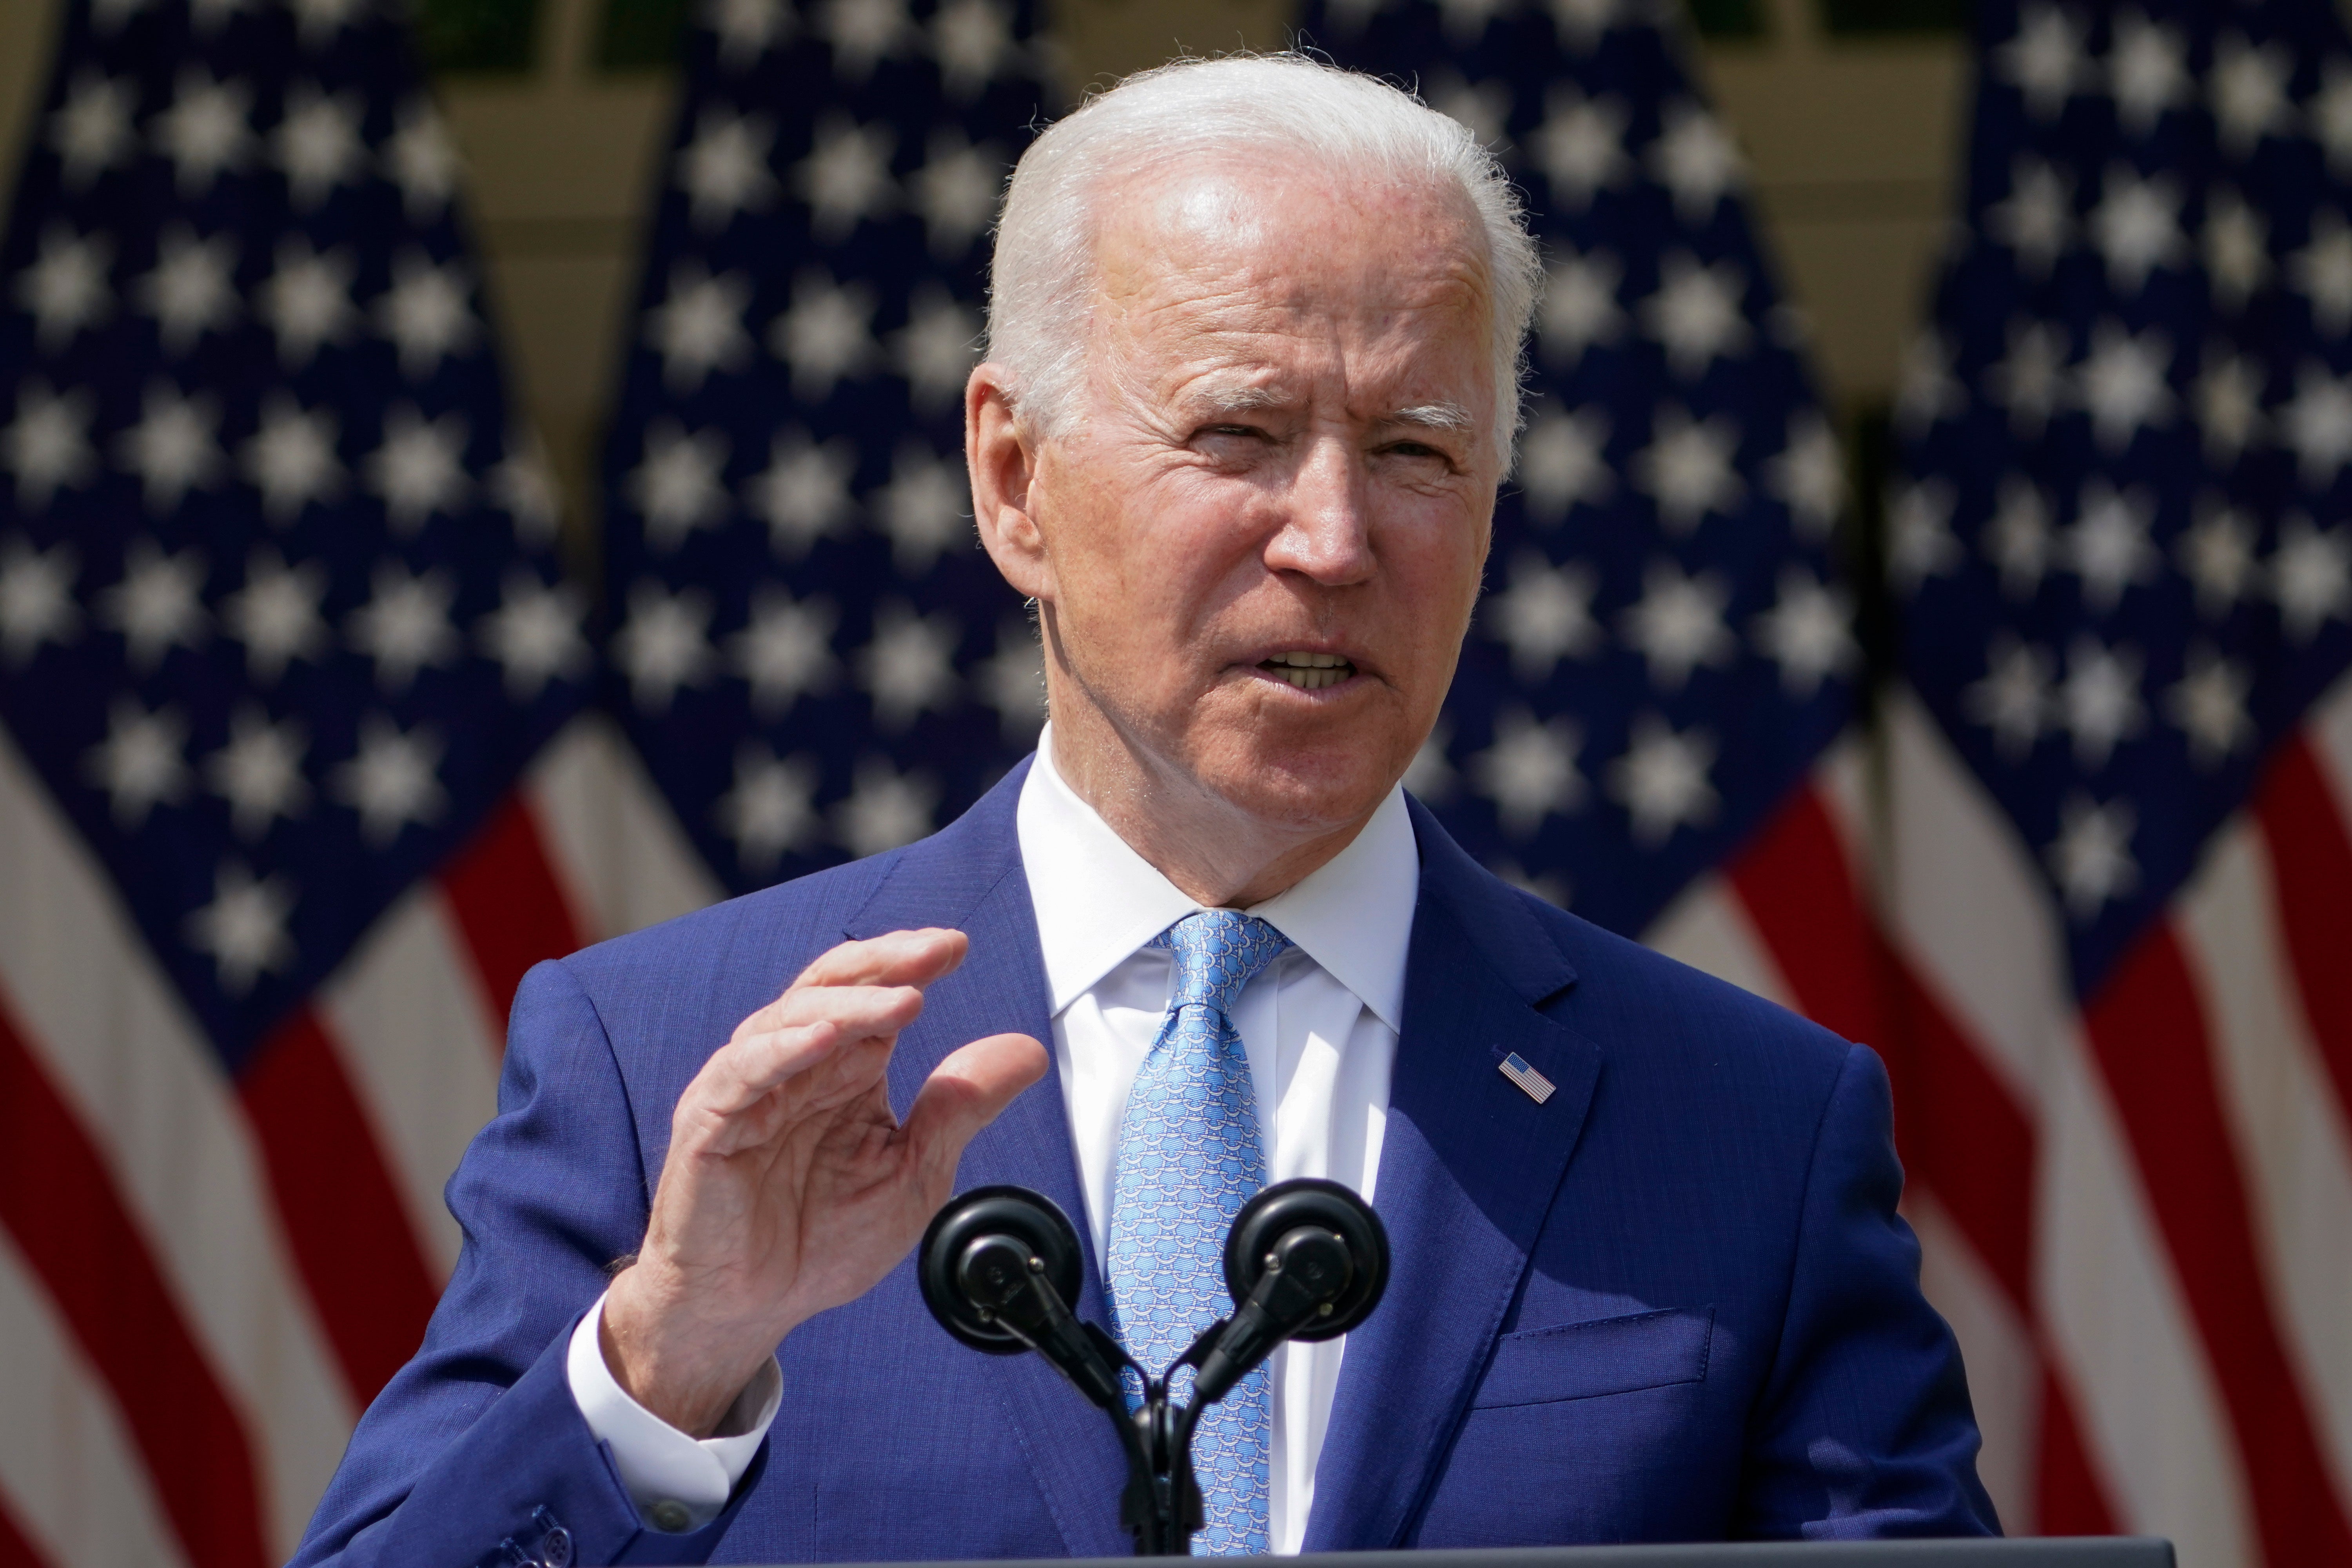 President Joe Biden. The US is ‘concerned by the violence in Northern Ireland and we join the British, Irish, and Northern Irish leaders in their calls for calm’